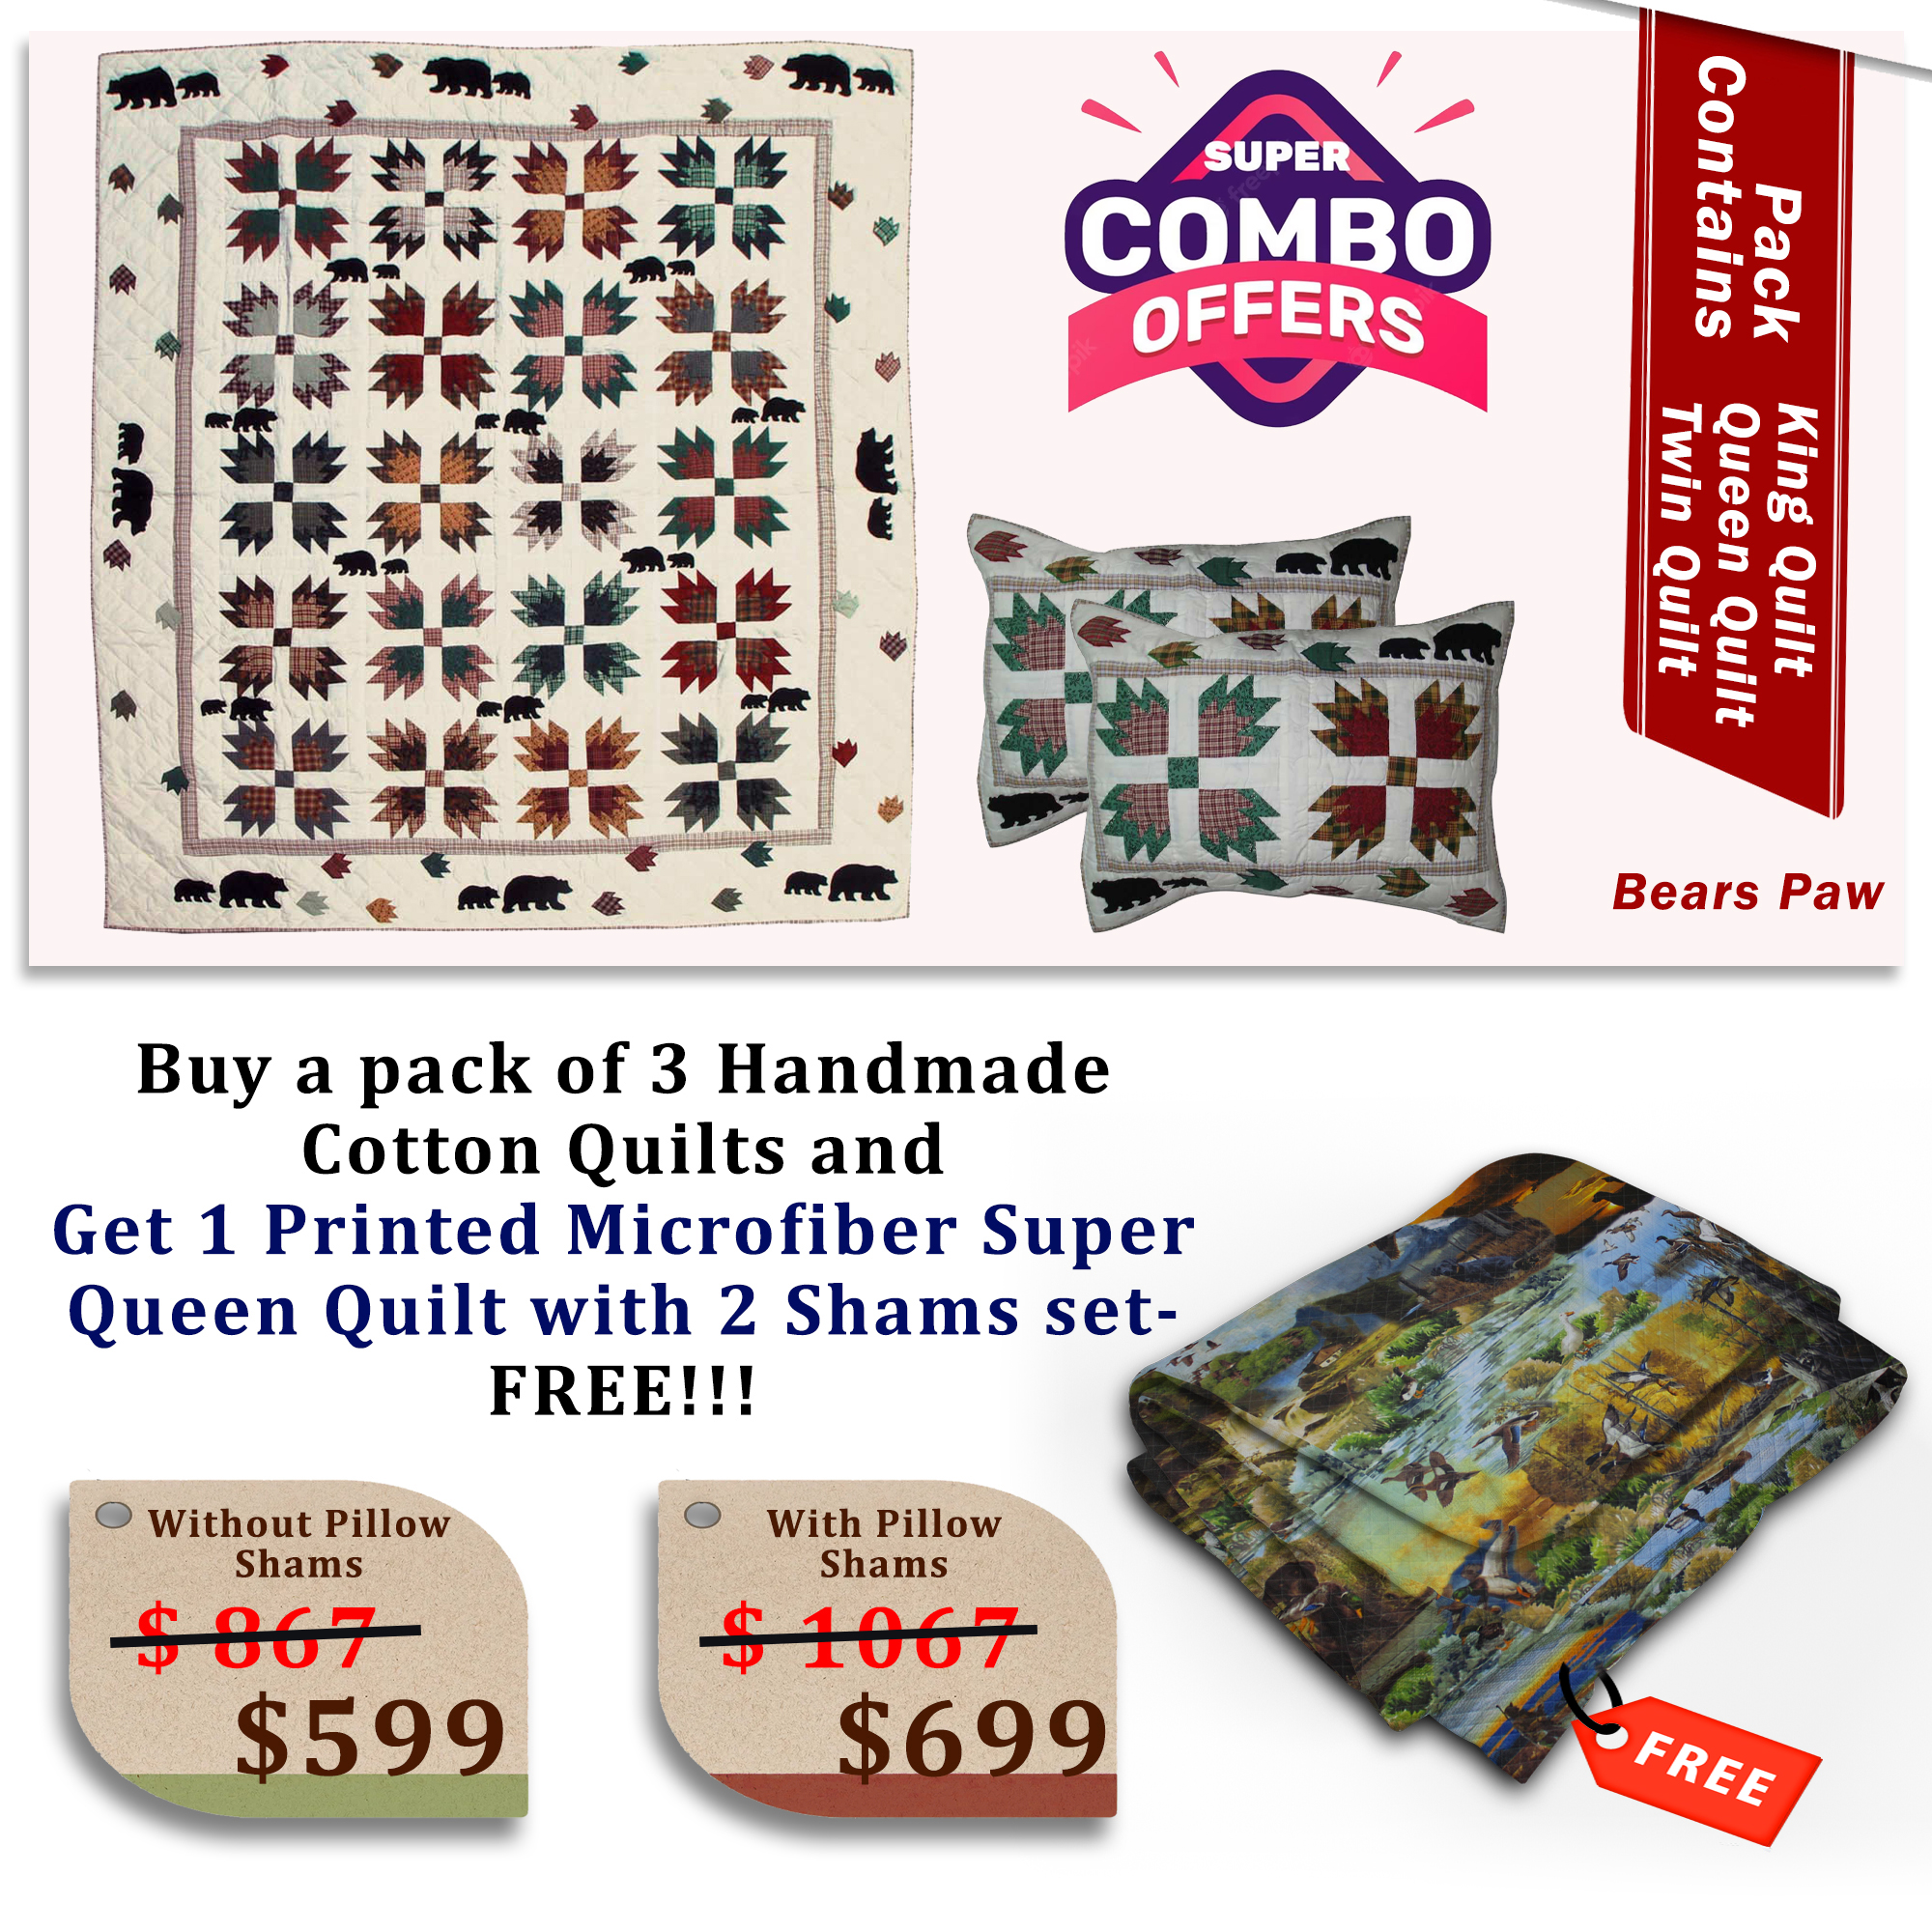 Bears Paw - Handmade Cotton quilts  | Buy 3 cotton quilts and get 1 Printed Microfiber Super Queen Quilt with 2 Shams set FREE